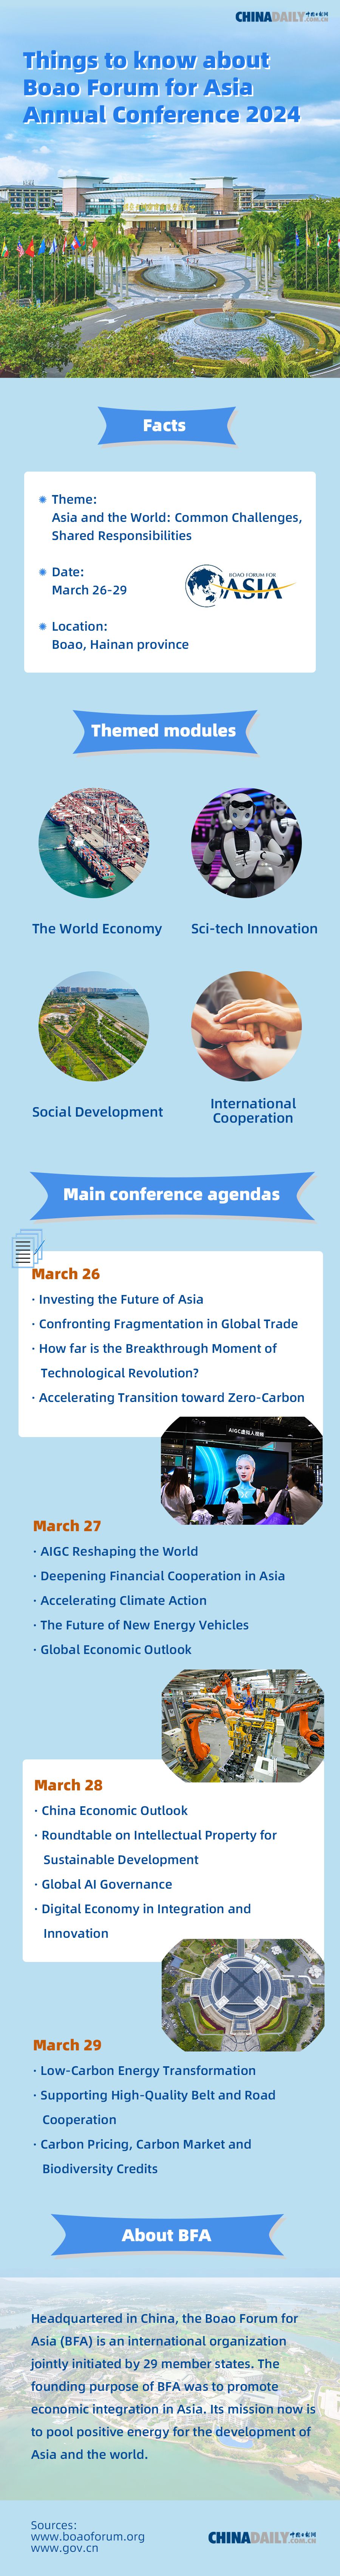 Things to know about Boao Forum for Asia Annual Conference 2024